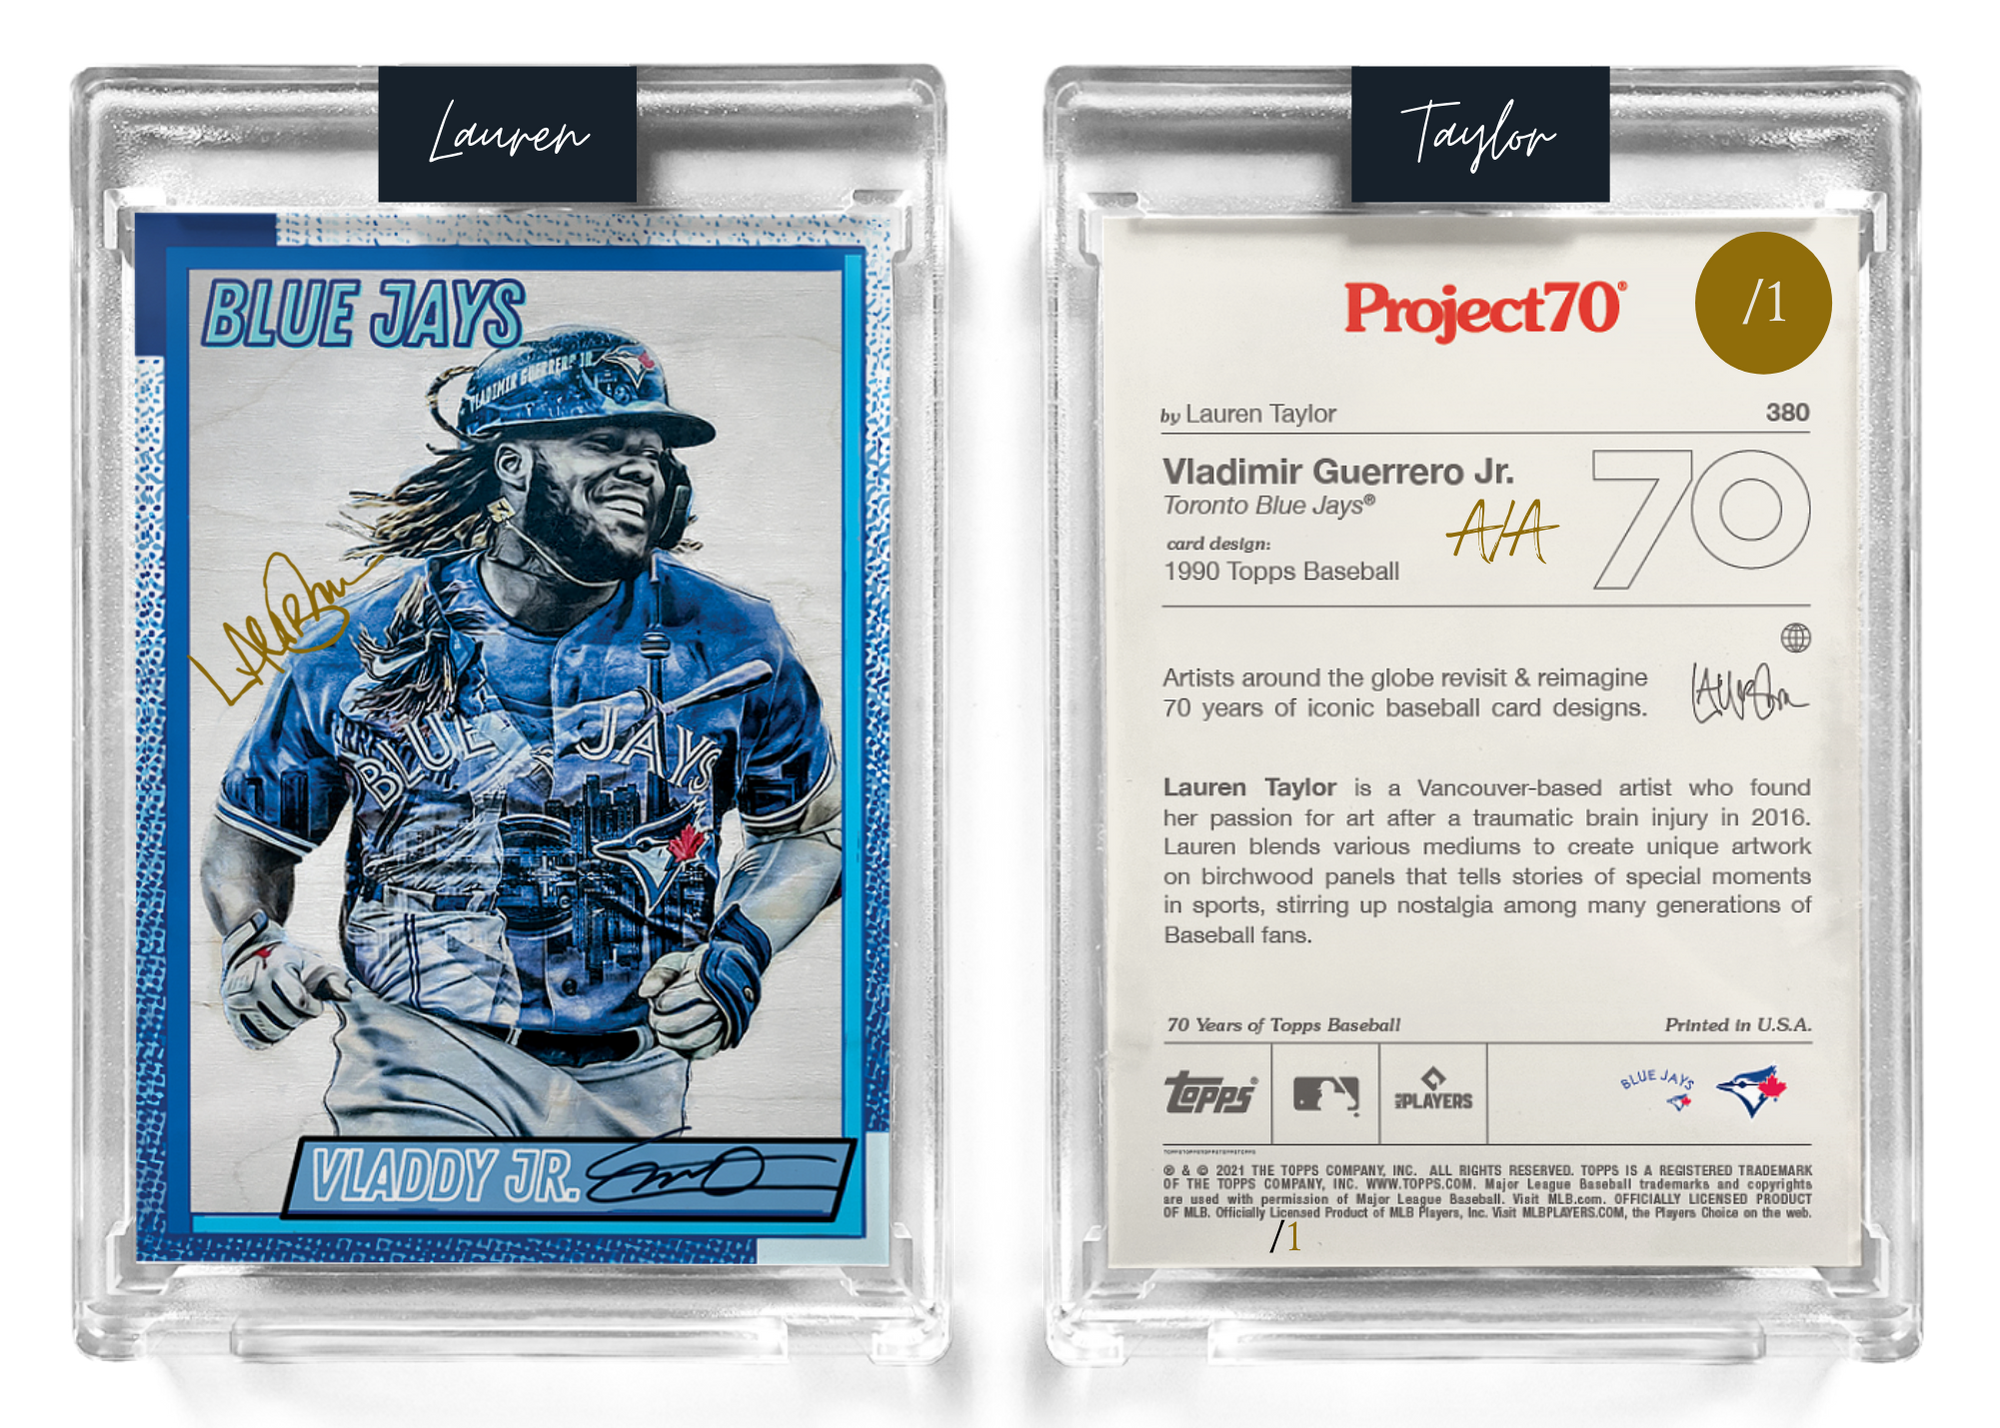 1 Gold Artist Signature - Topps Project 70 130pt card #380 by Lauren